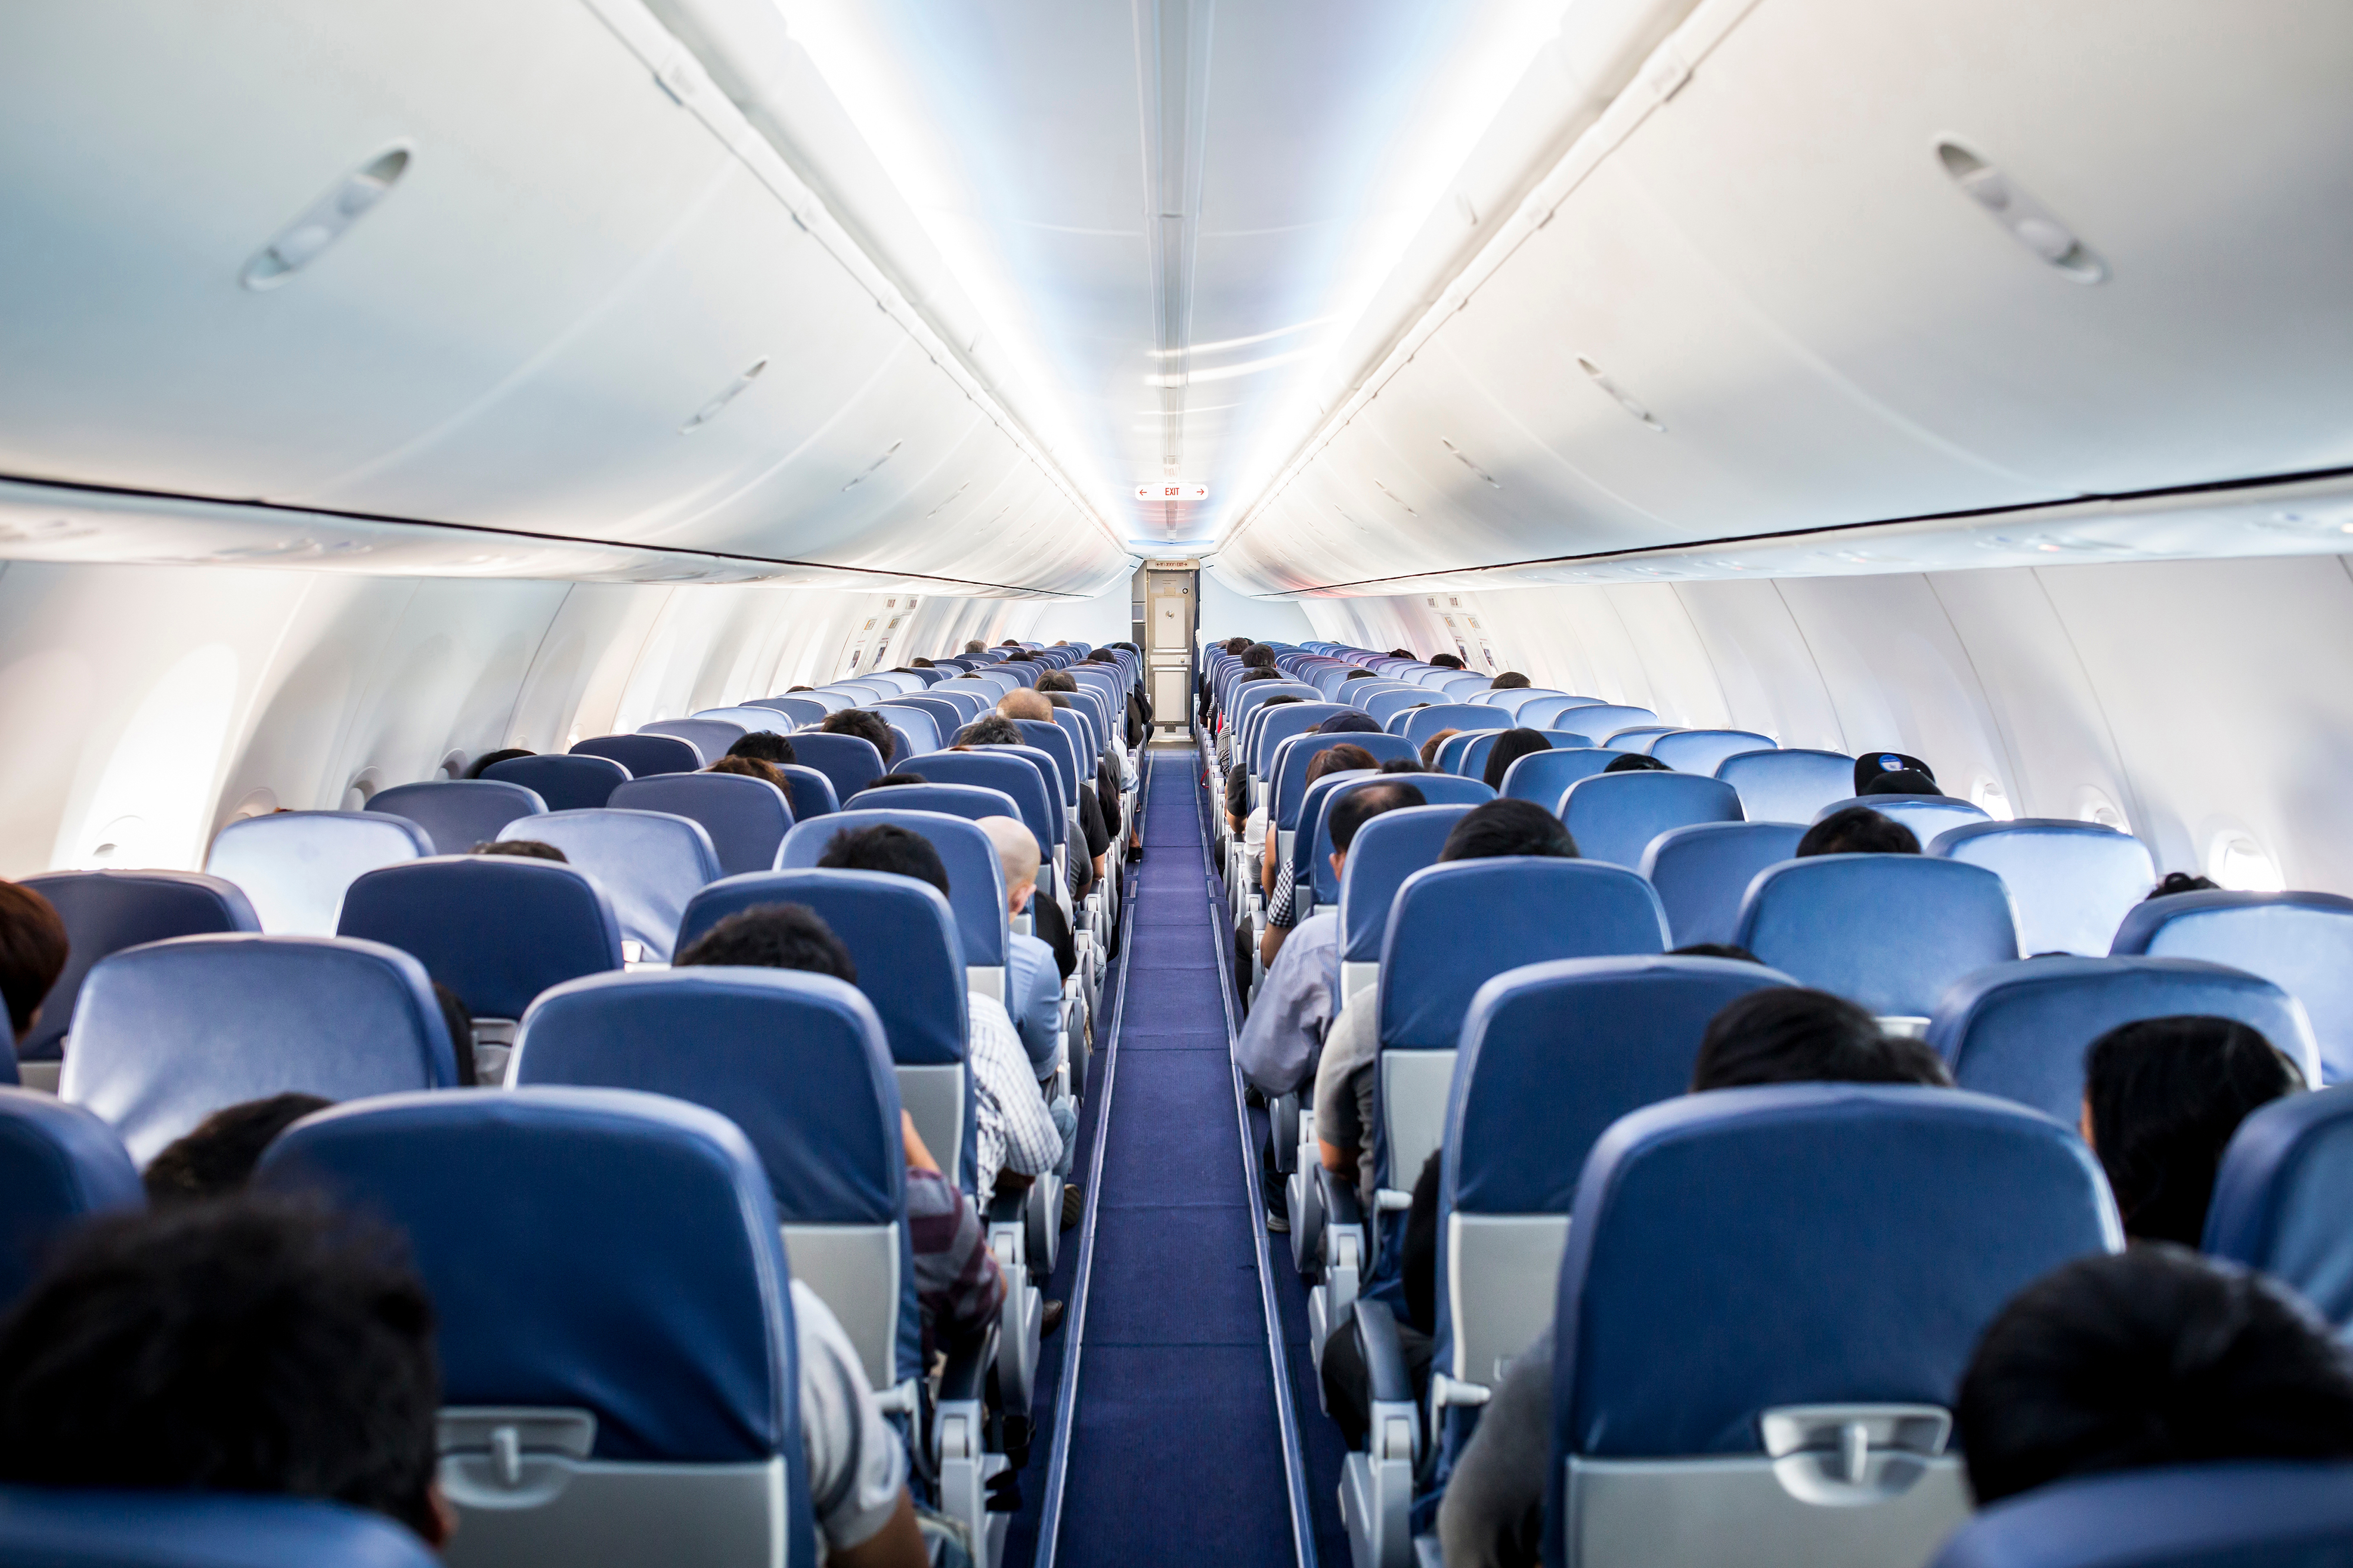 six rows of people seated on a plane with an aisle down the middle